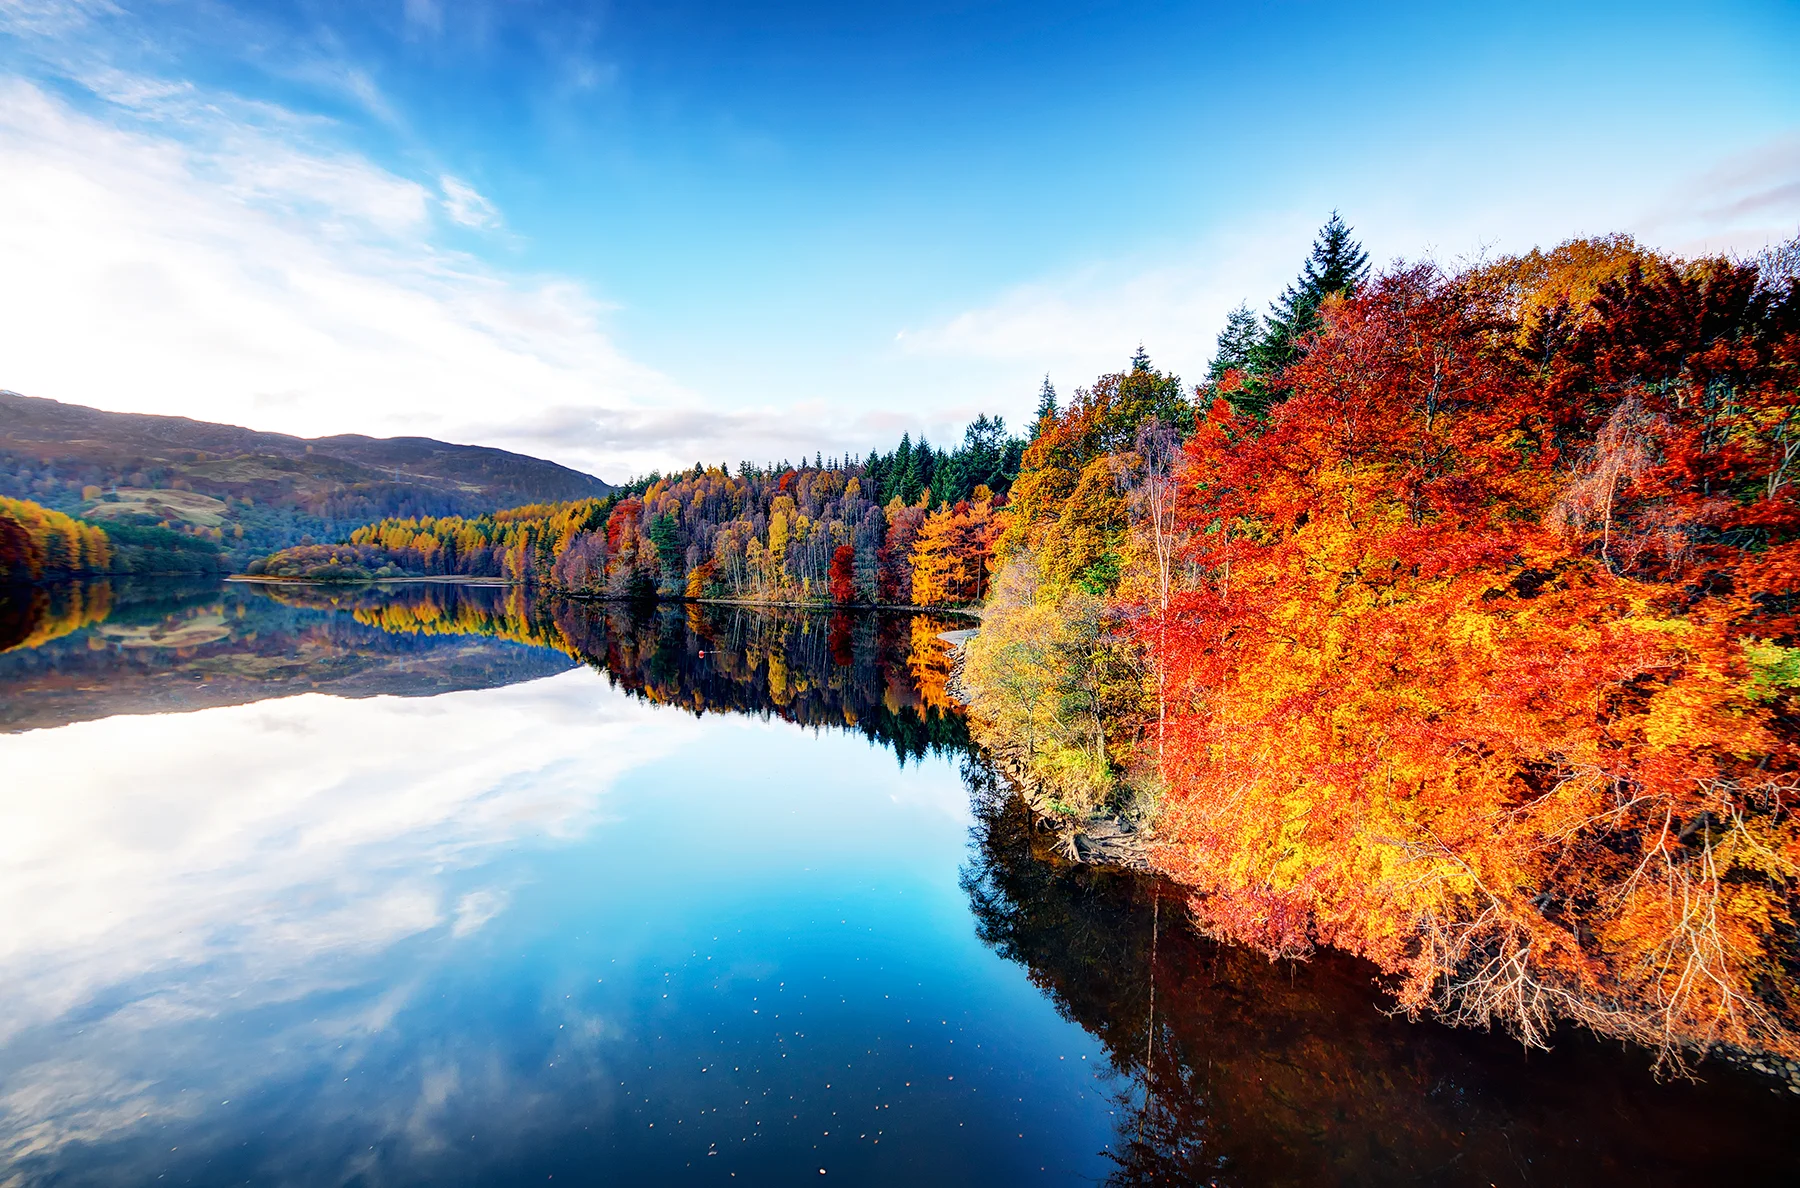 View of Loch Faskally in autumn with the trees on the bank displaying a wide range of brightly coloured leaves.